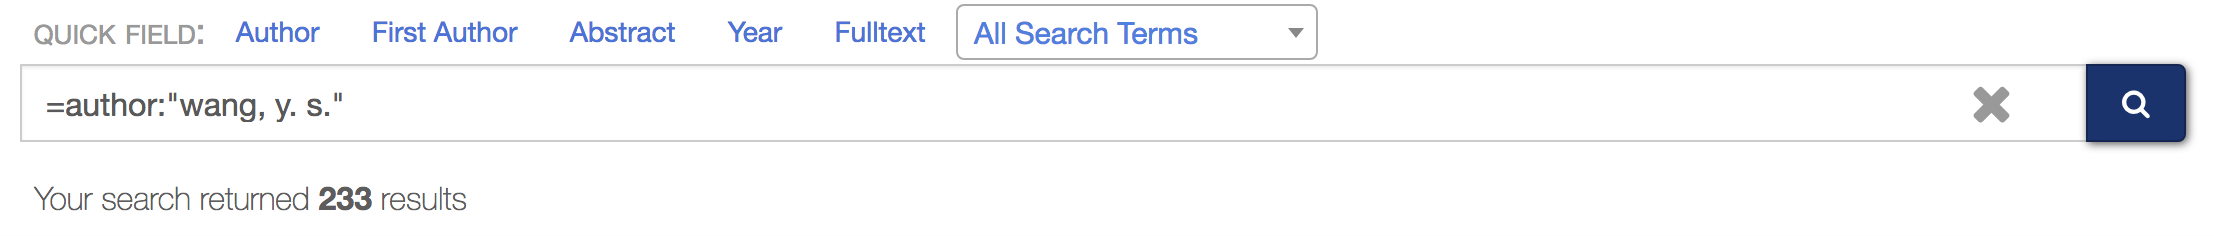 Exact
   name matching query with full family name and given name and middle name
   initials. 233 total search results.